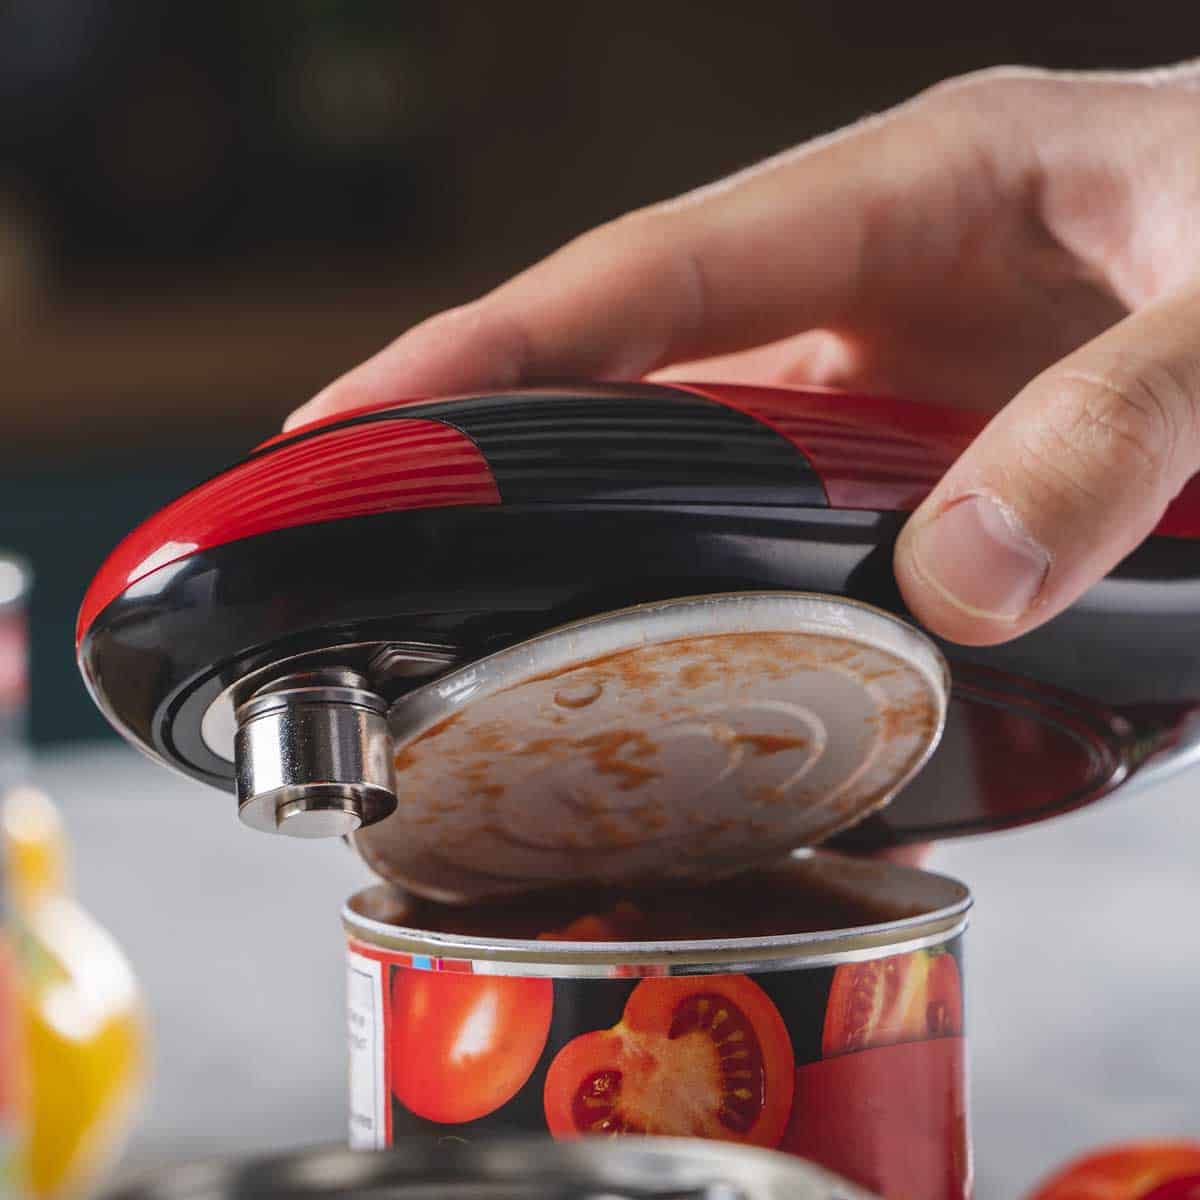 Promotional Kitchen Can Opener